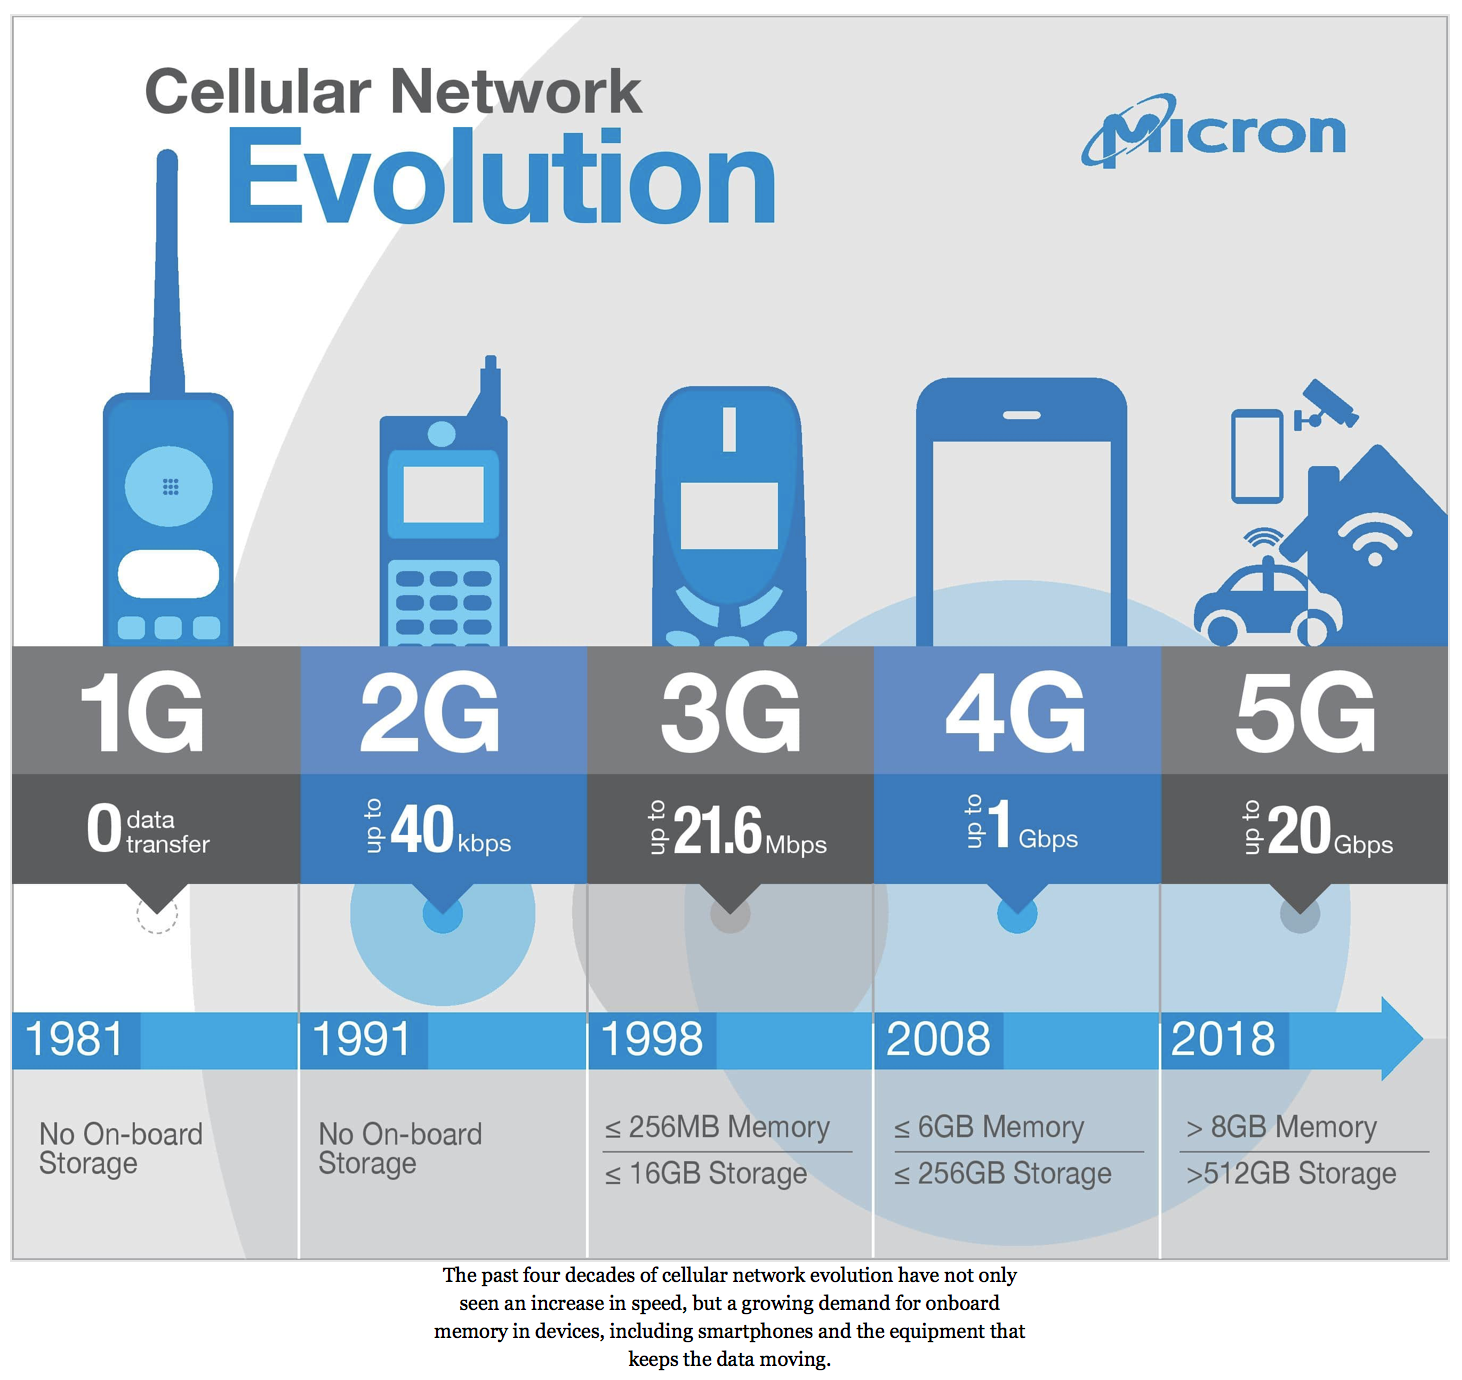 5G Network Use and Benefits